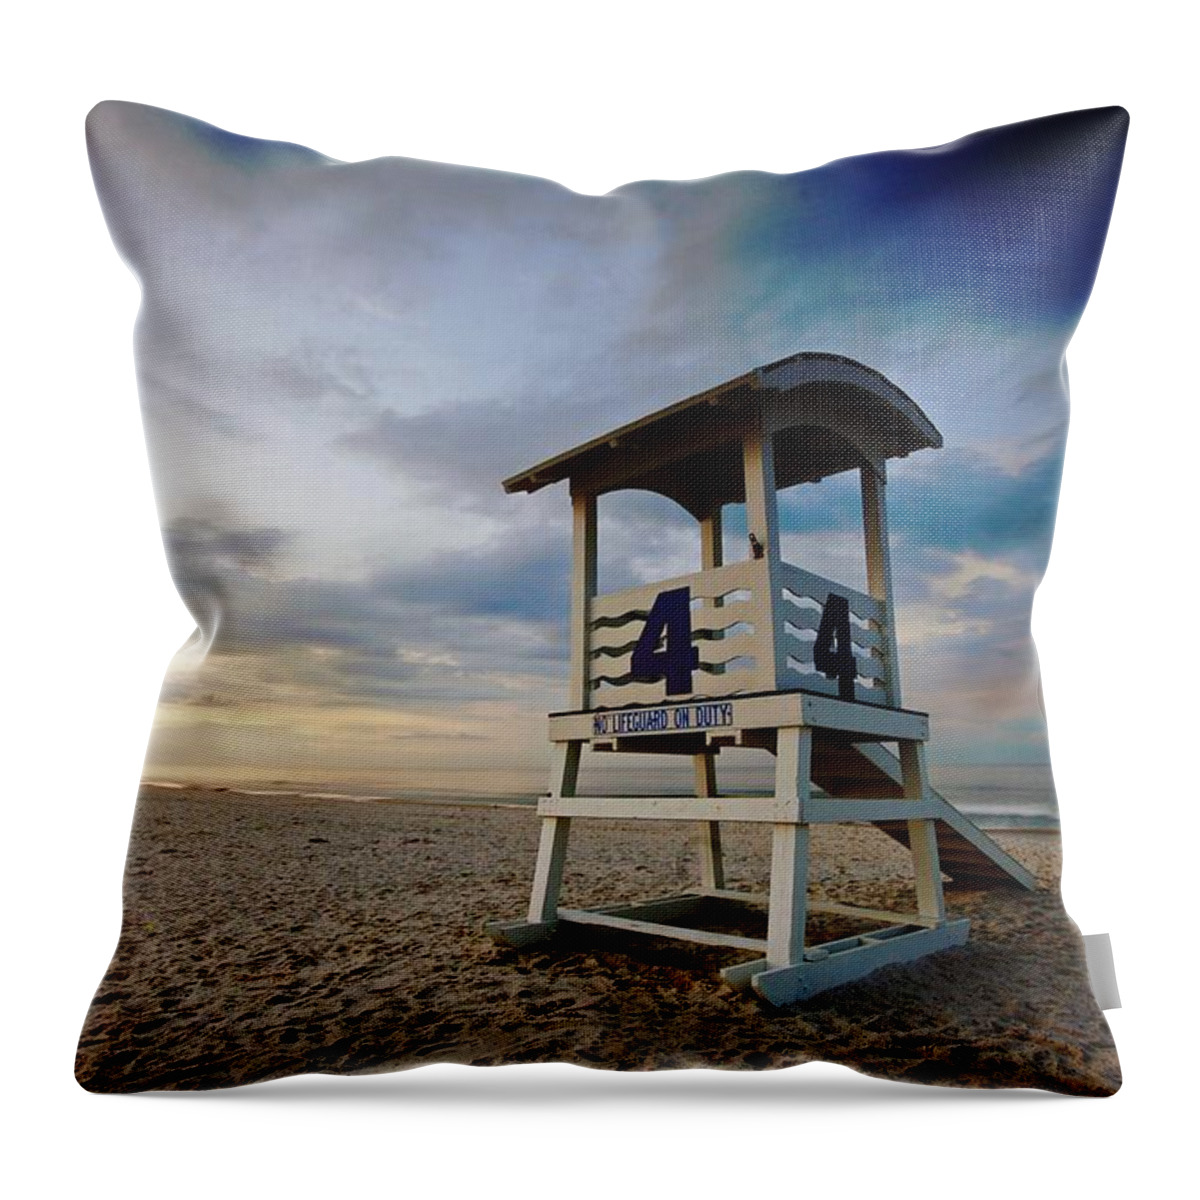 Palm Throw Pillow featuring the digital art No 4 Lifeguard station by Michael Thomas